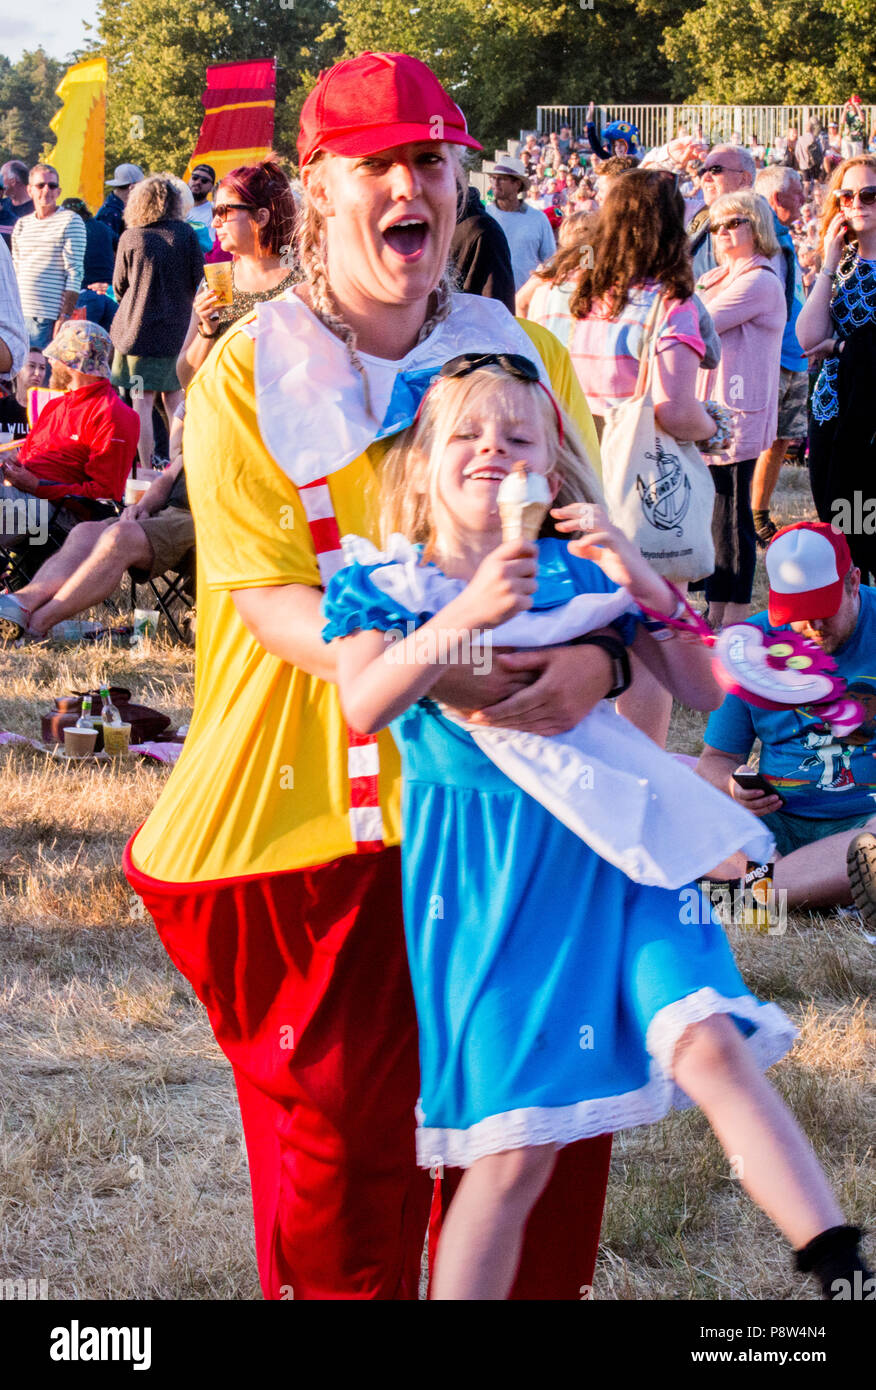 Portrait of mother and daughter, wearing fancy dress, enjoying the atmosphere at the Obelisk Stage at Latitude Festival, Henham Park, Suffolk, England, 13 July 2018. Stock Photo